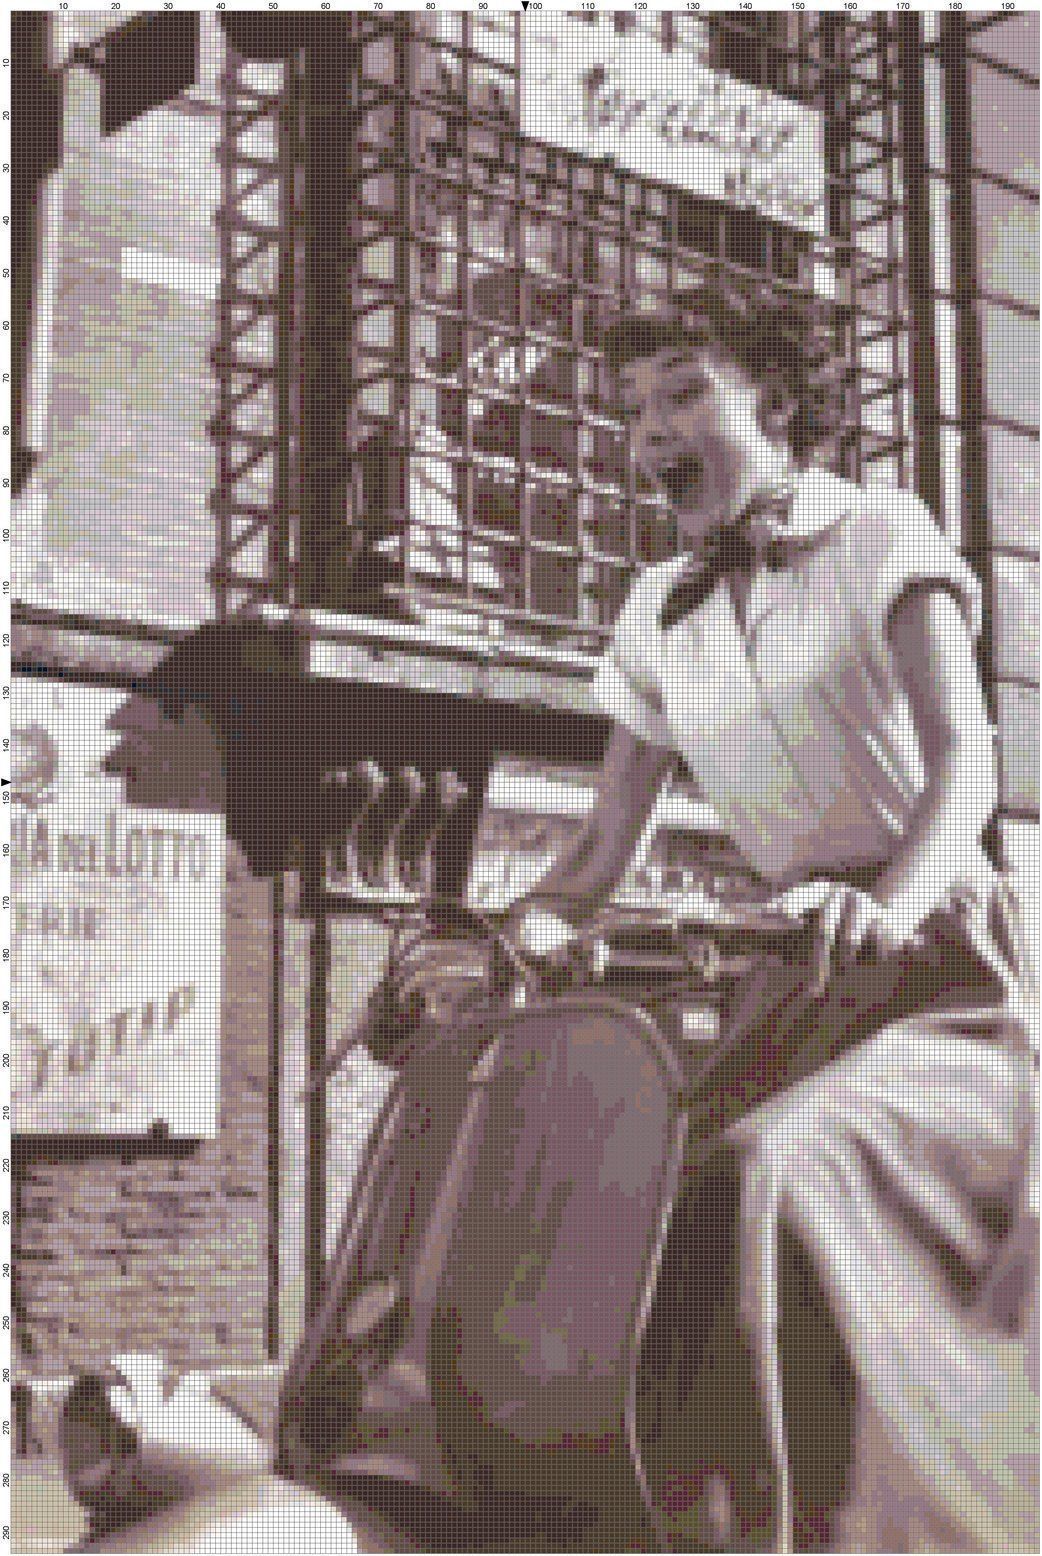 Details about Handmade Audrey Hepburn on Vespa Scooter DIGITAL Counted Cross-Stitch Pattern -   11 holiday Girl audrey hepburn
 ideas